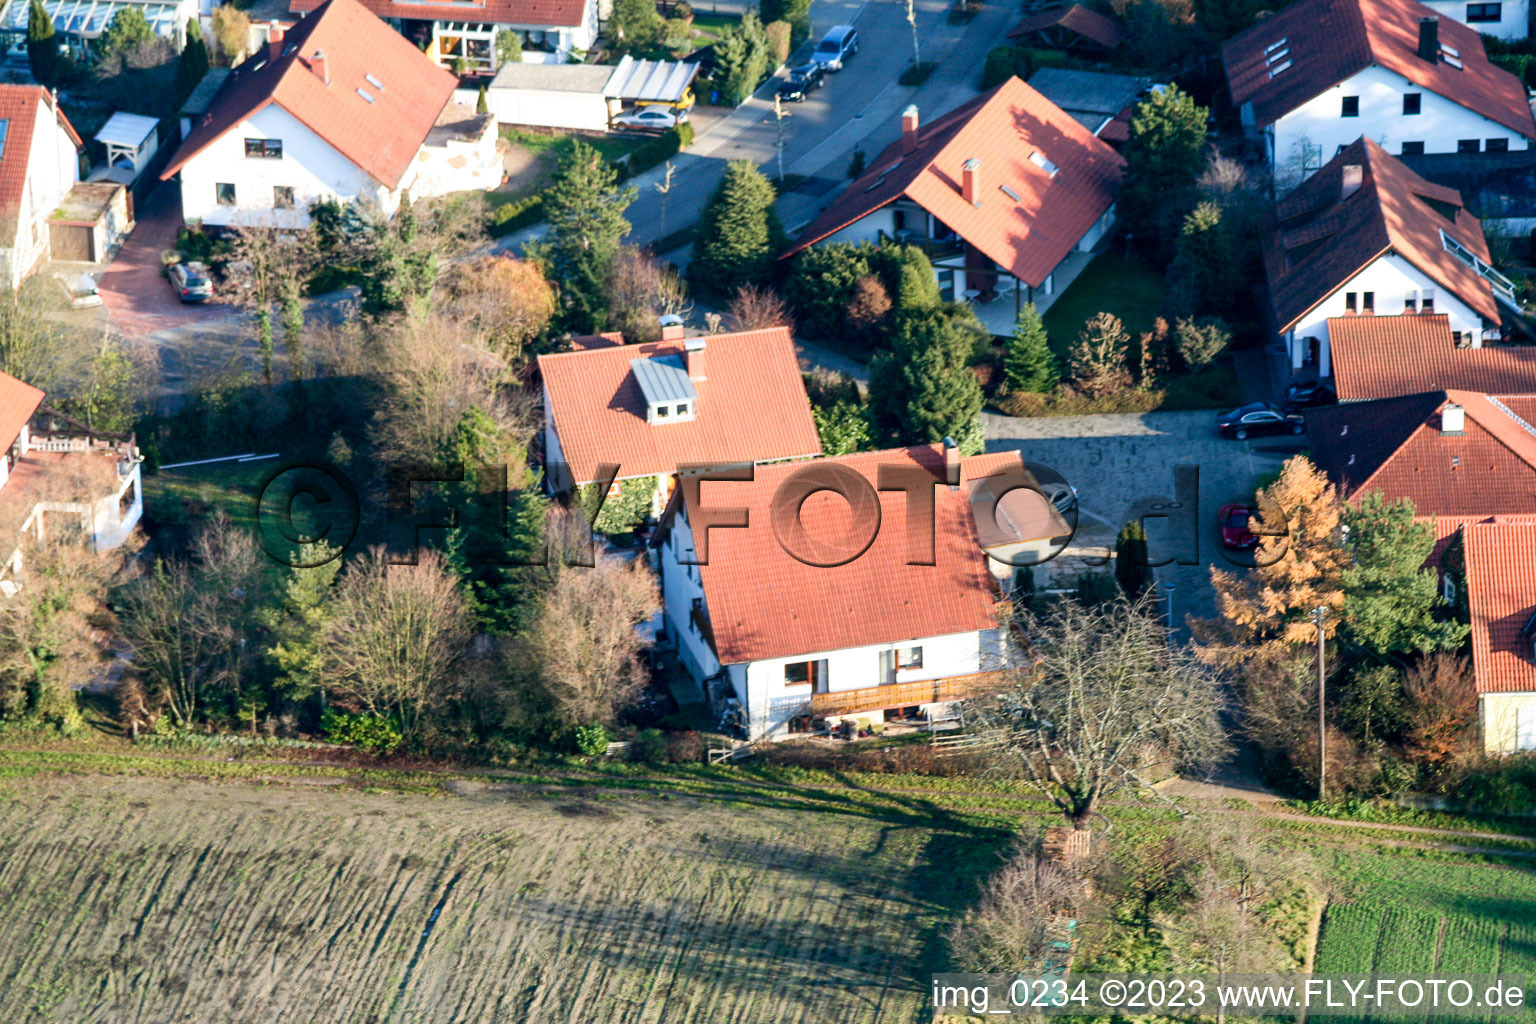 Aerial view of New development area at the Tongruben in Rheinzabern in the state Rhineland-Palatinate, Germany